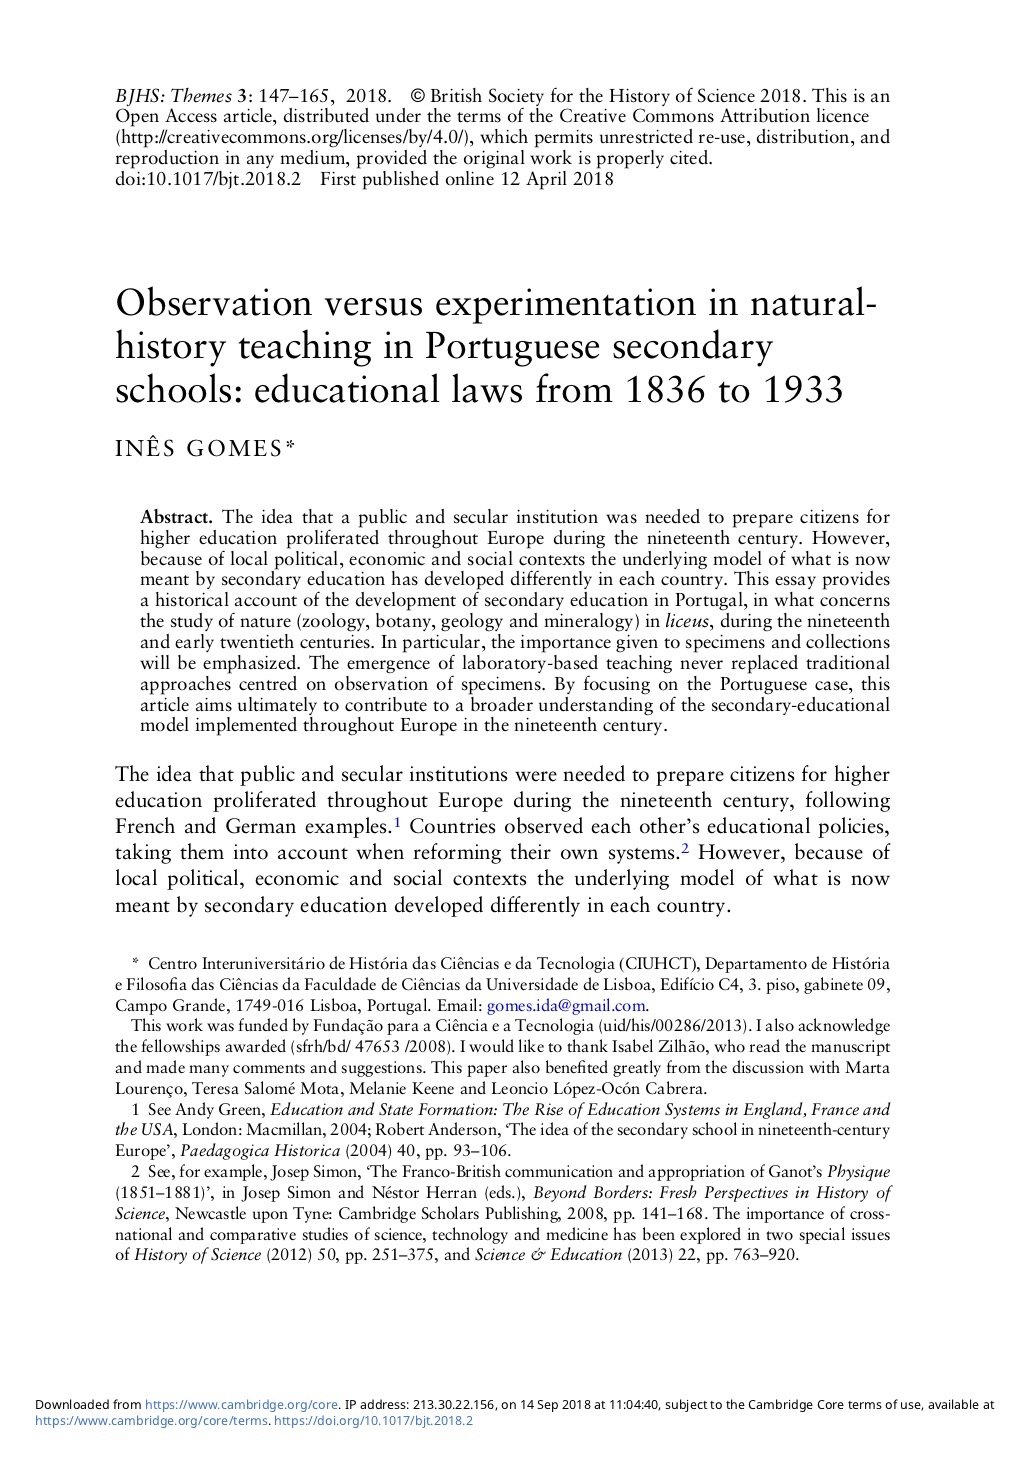 Observation versus experimentation in natural-history teaching in Portuguese secondary schools: educational laws from 1836 to 1933, Capa